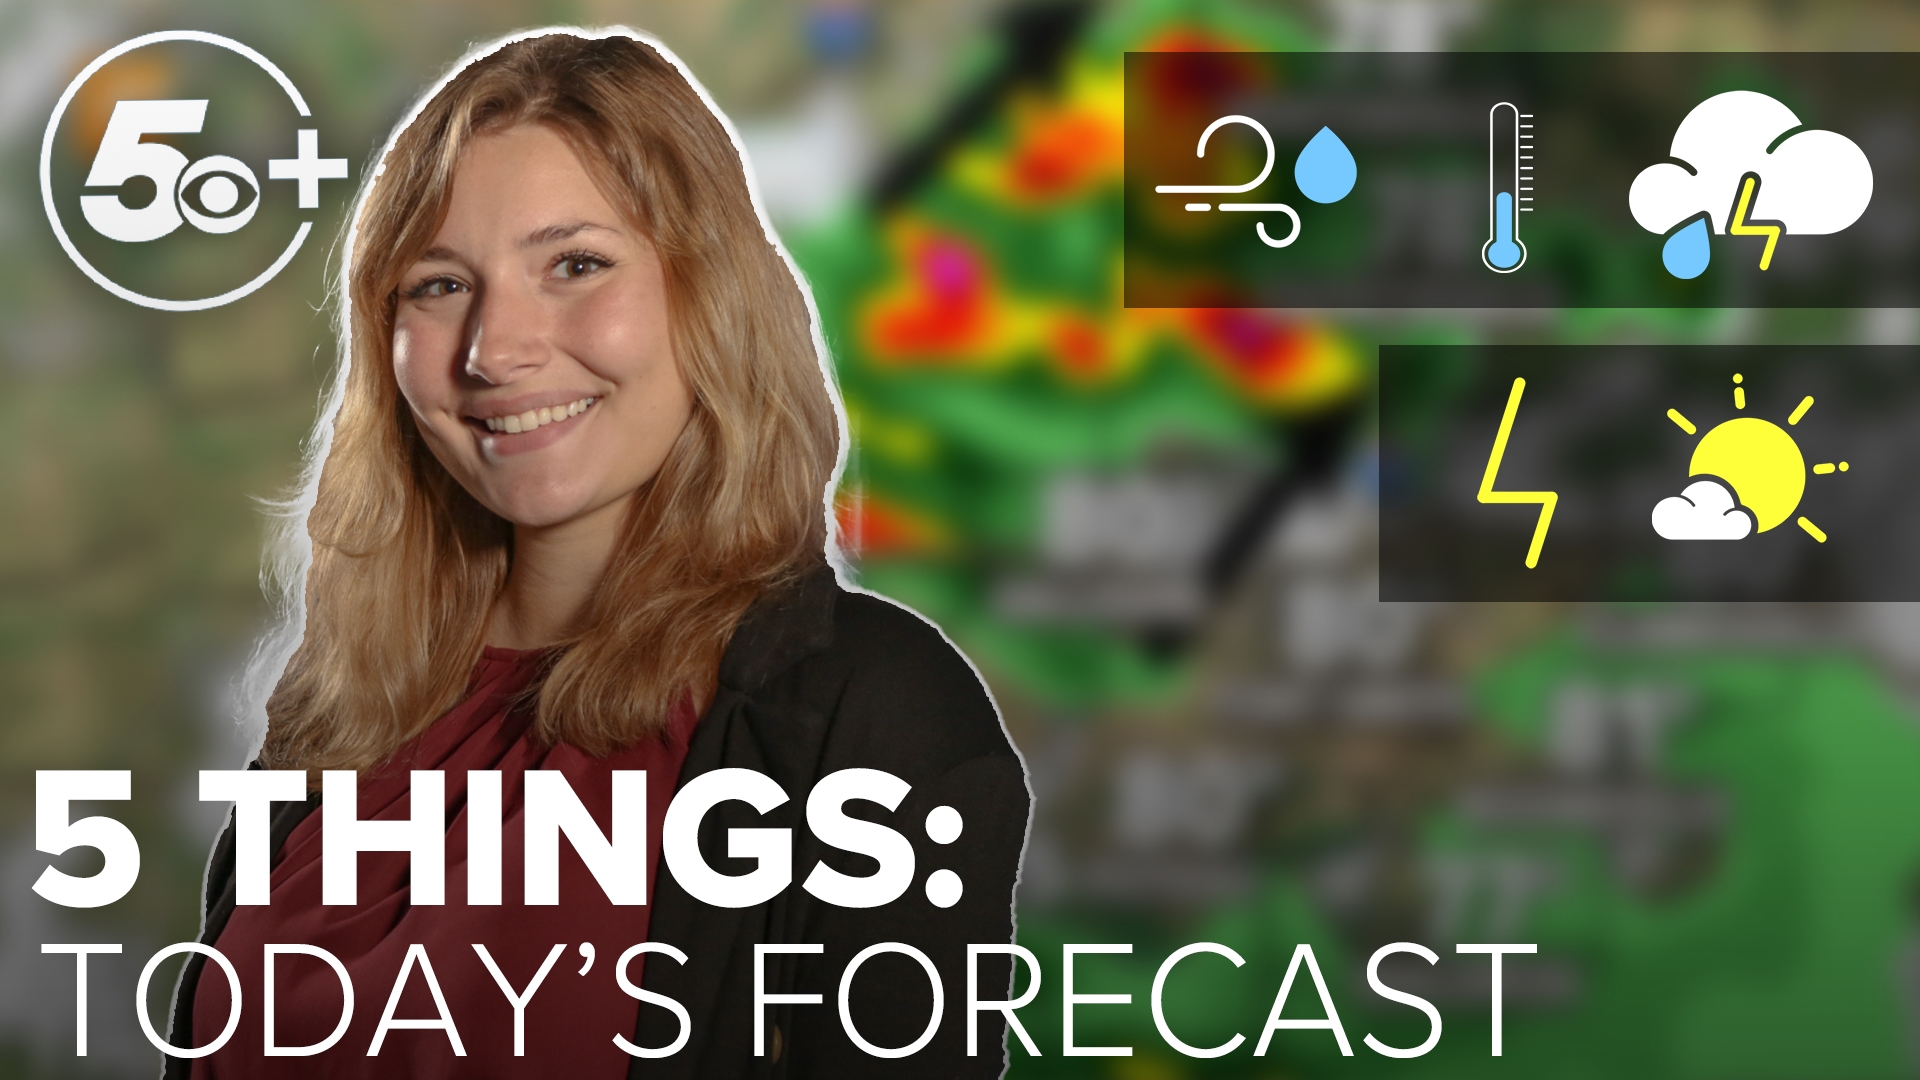 5NEWS Meteorologist Bella Grace goes over what you need to know about the severe weather threats for tonight.